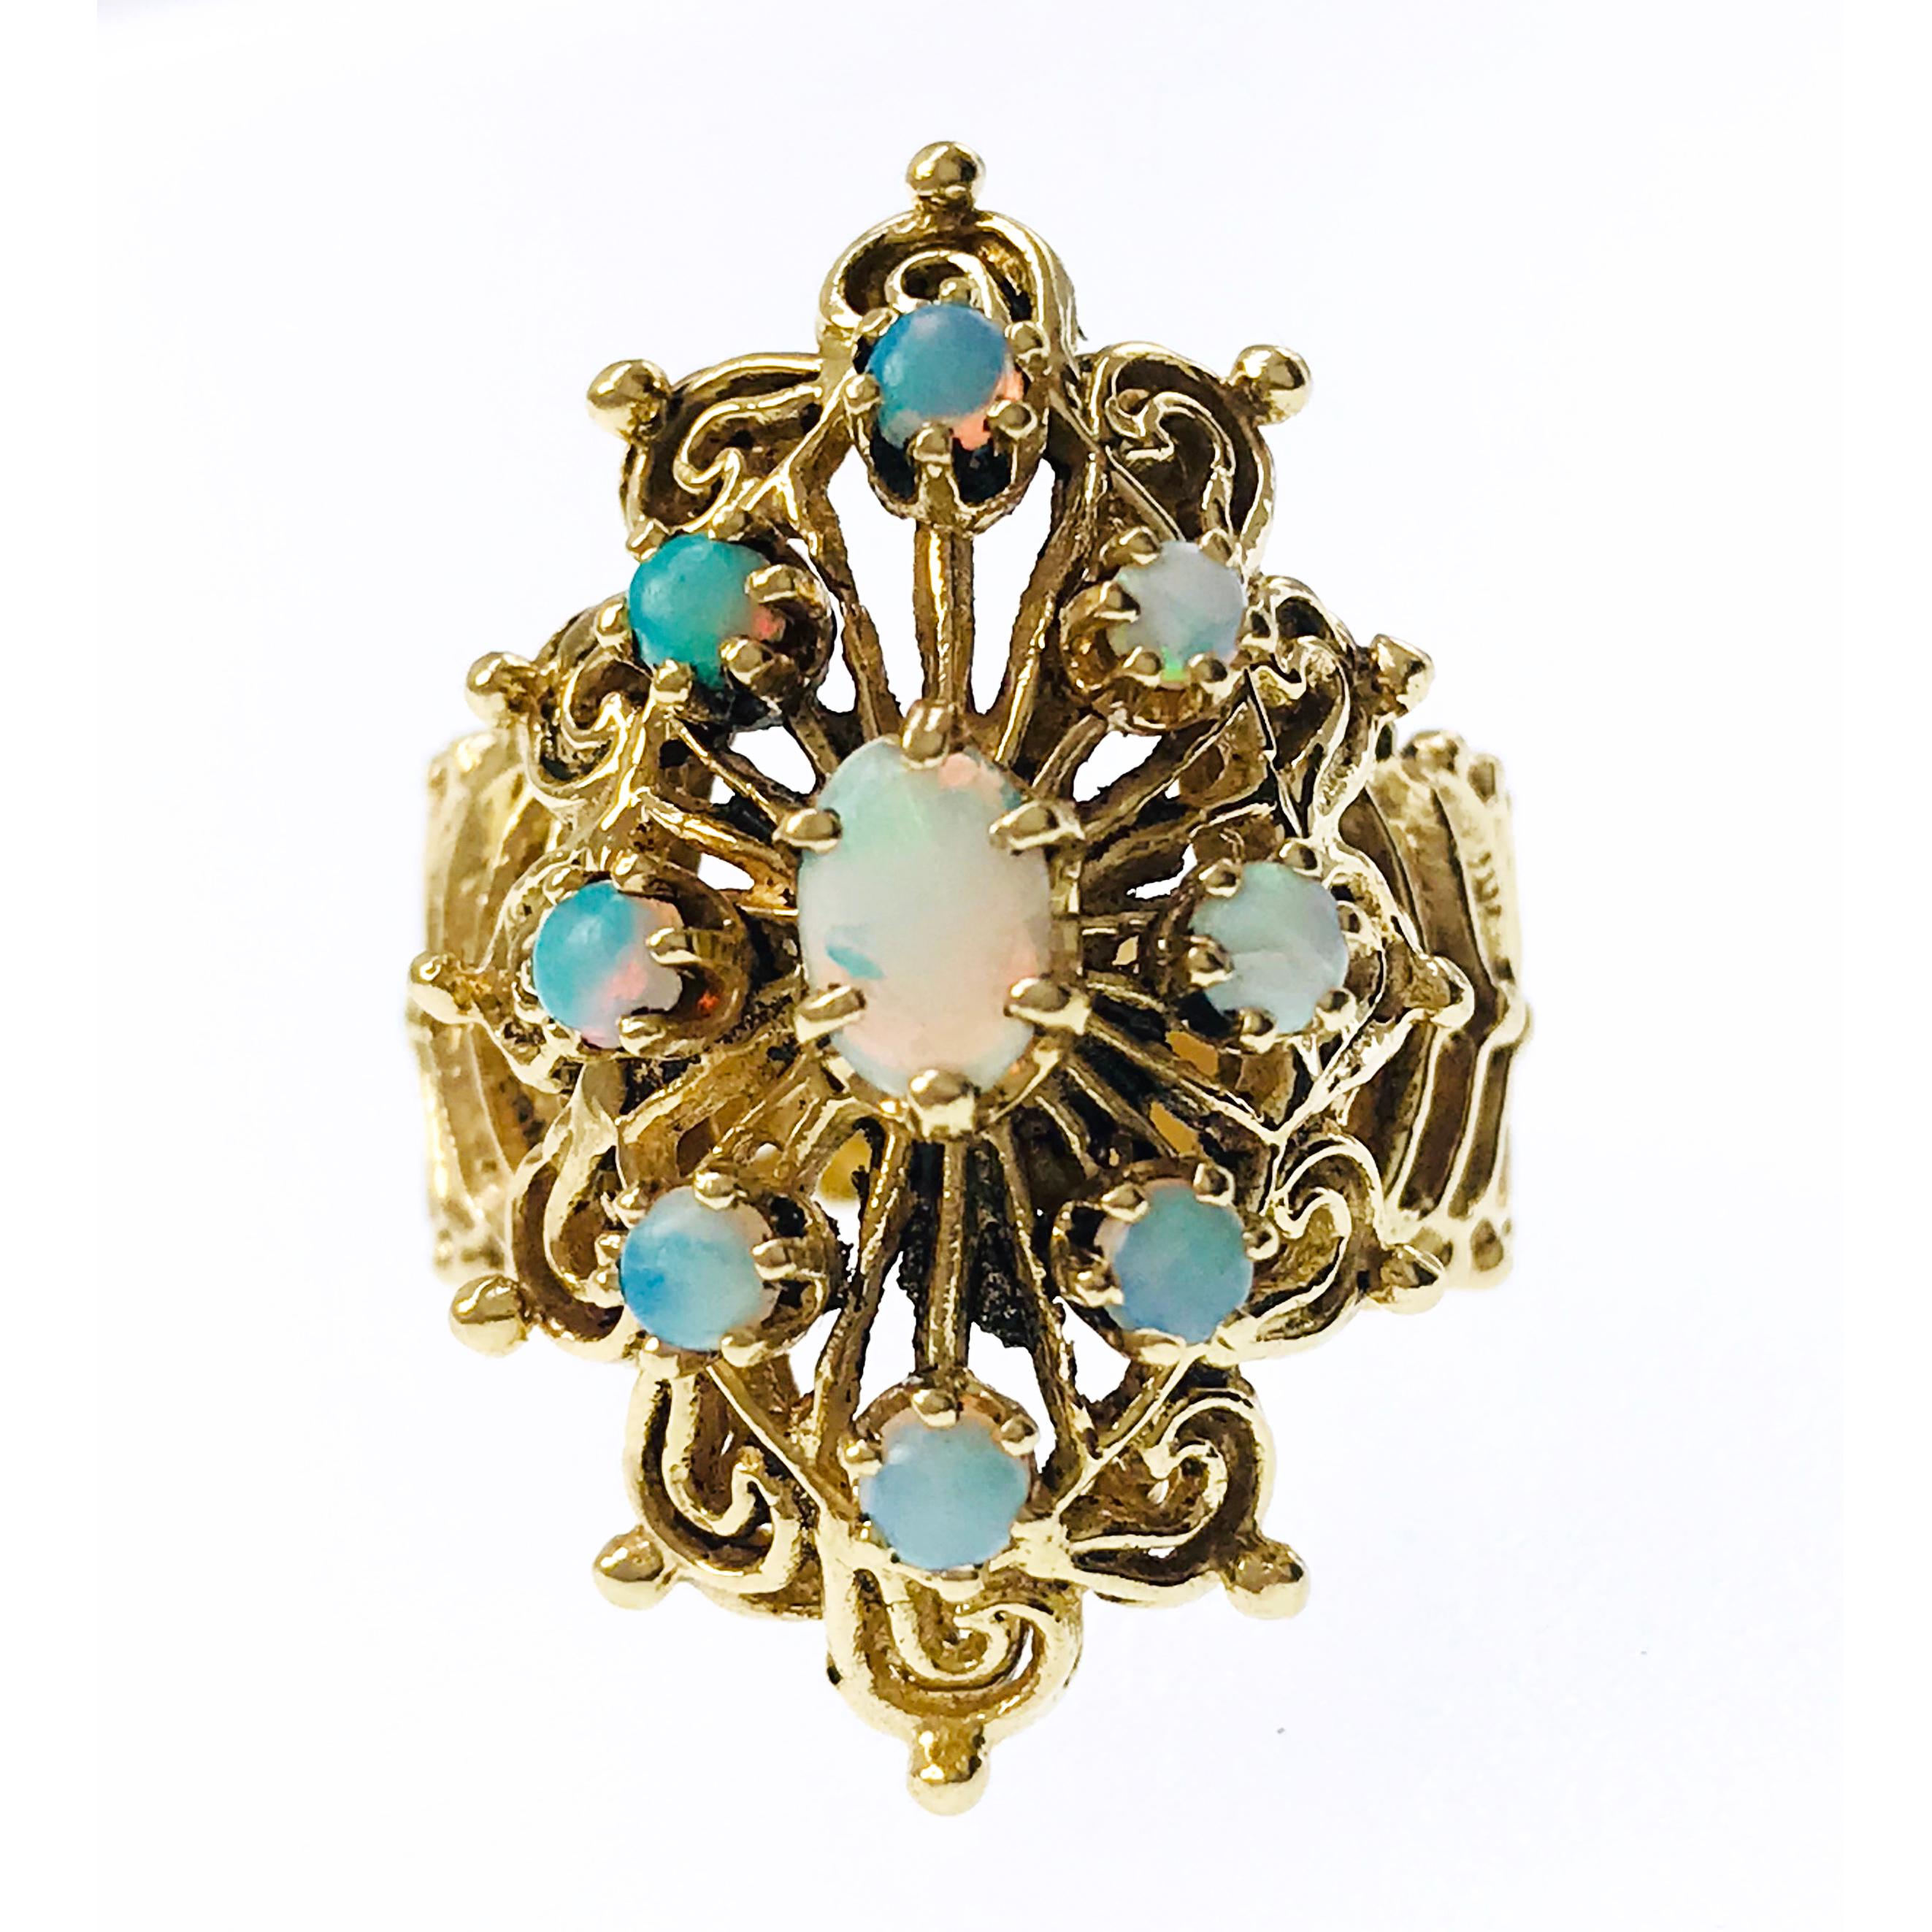 14 Karat Vintage Nine Opal Ornate Ring. One oval six-prong set 6x4mm Opal, with a approximate weight of 0.32ct serves as the central focal point of this scroll designed ring. Eight Opals measuring 2.5mm set in six-prong settings with a total weight